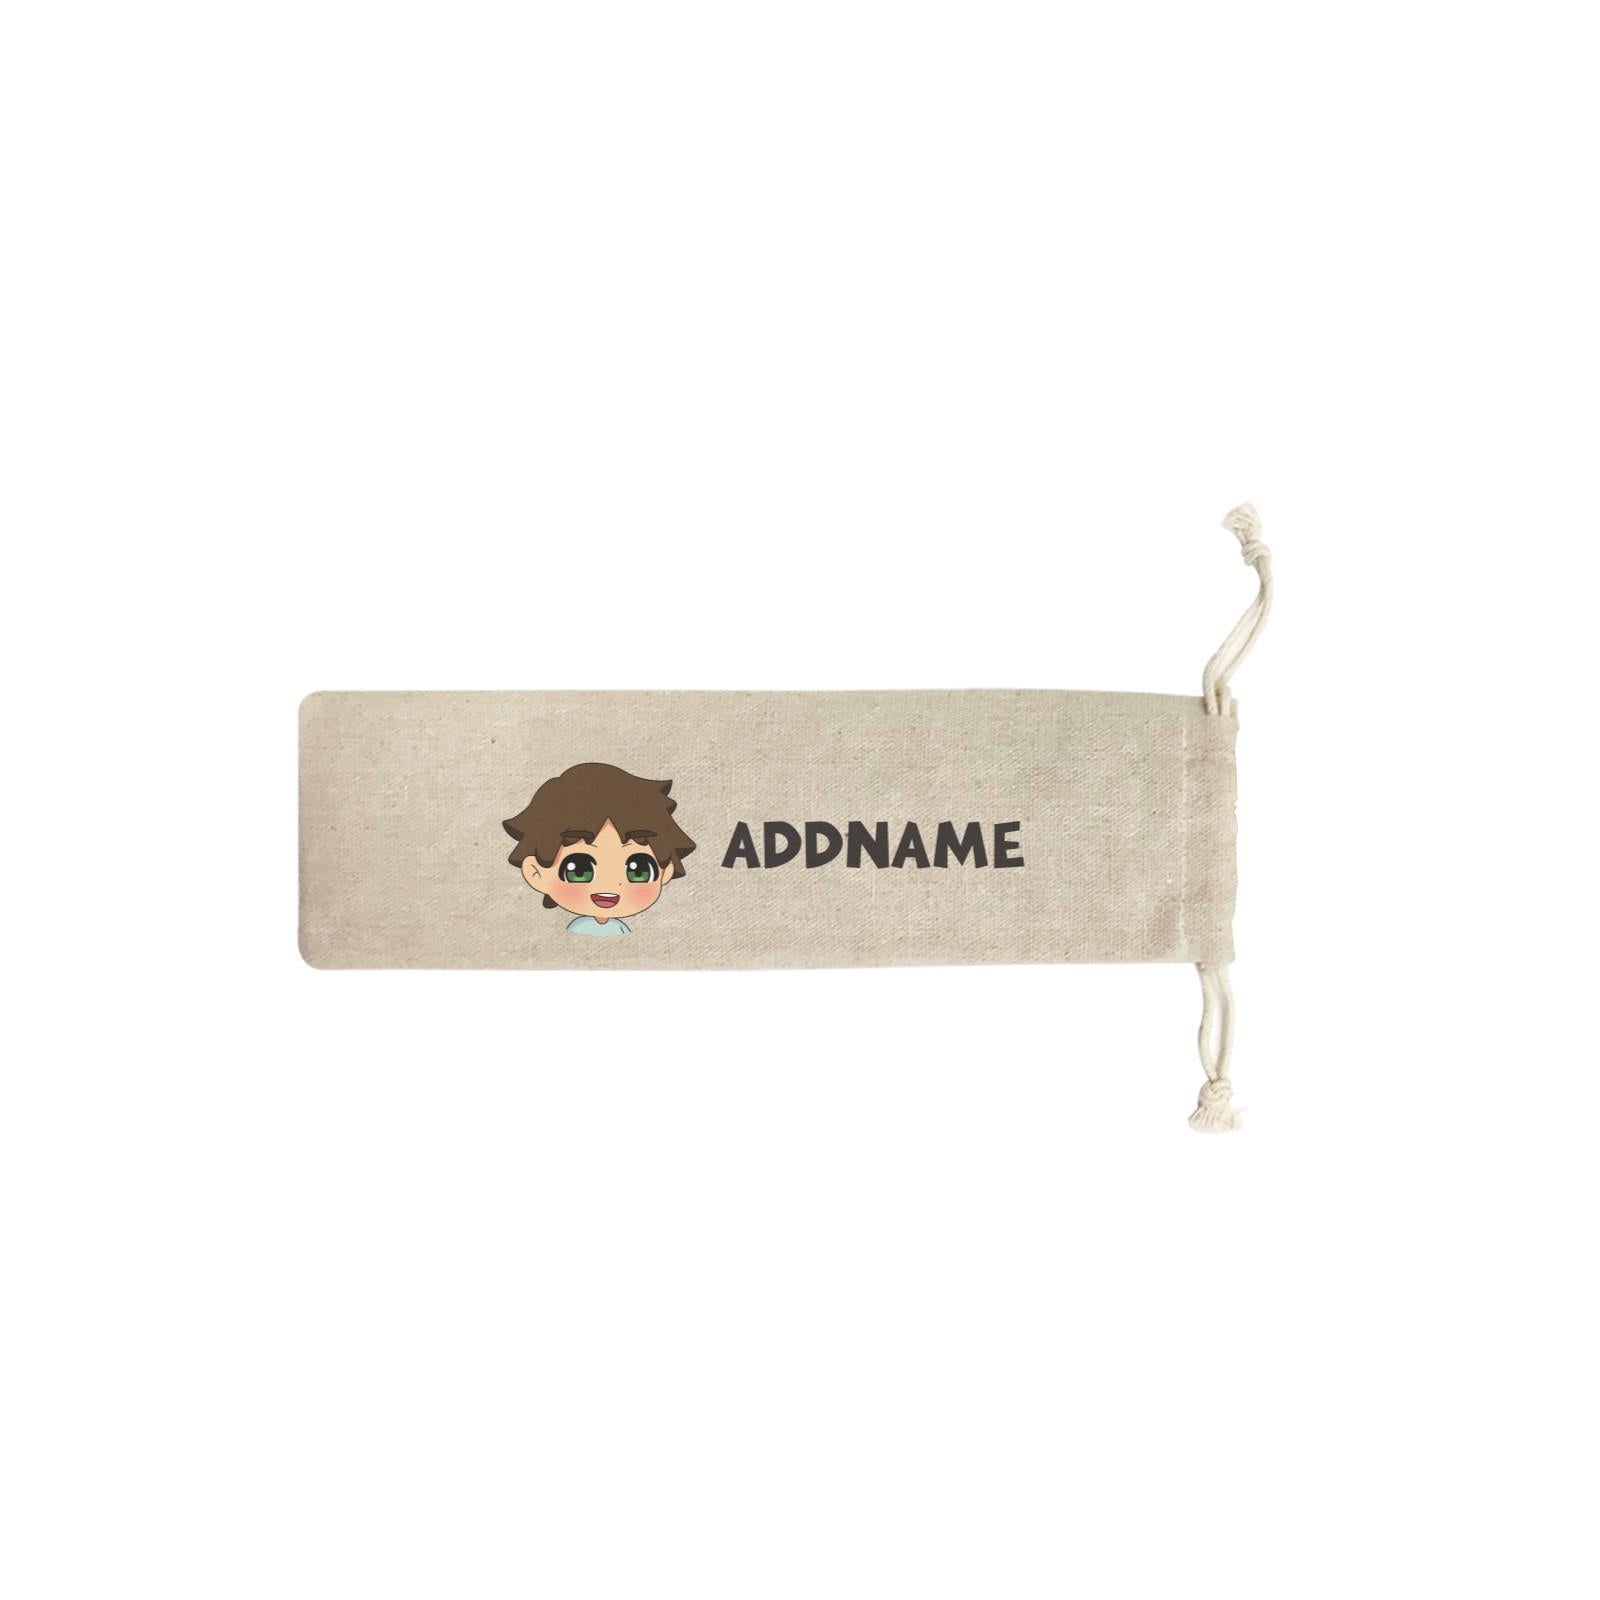 Children's Day Gift Series Little Boy Facing Left Addname SB Straw Pouch (No Straws included)